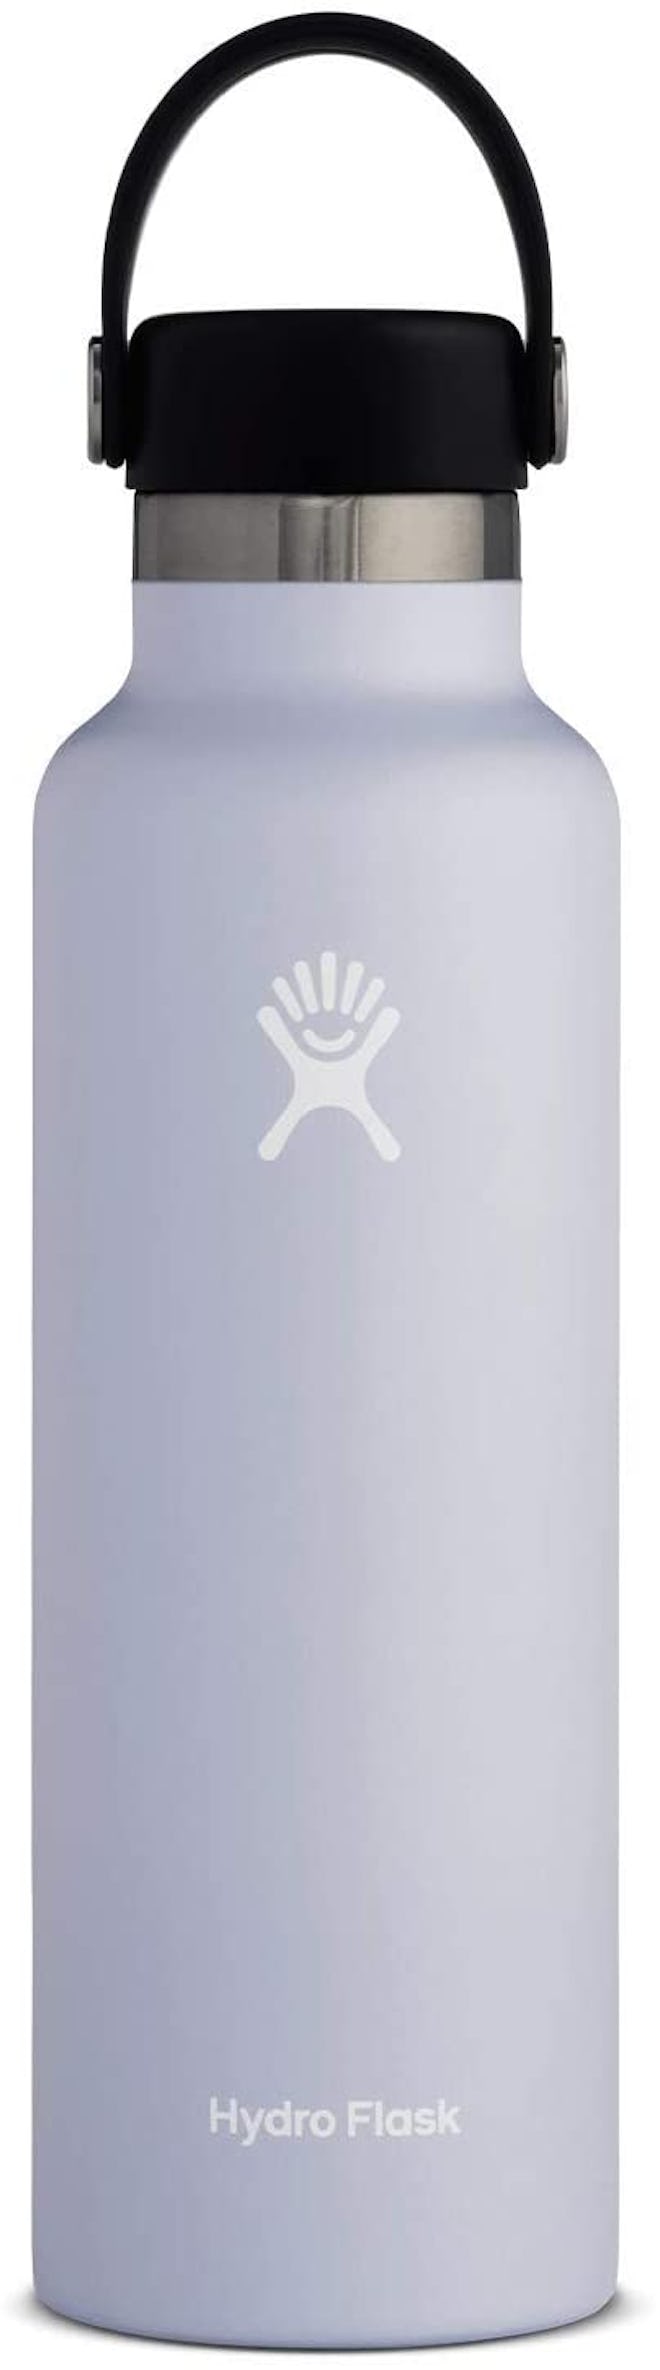 Hydro Flask Standard Mouth Insulated Water Bottle, 18 Oz. 